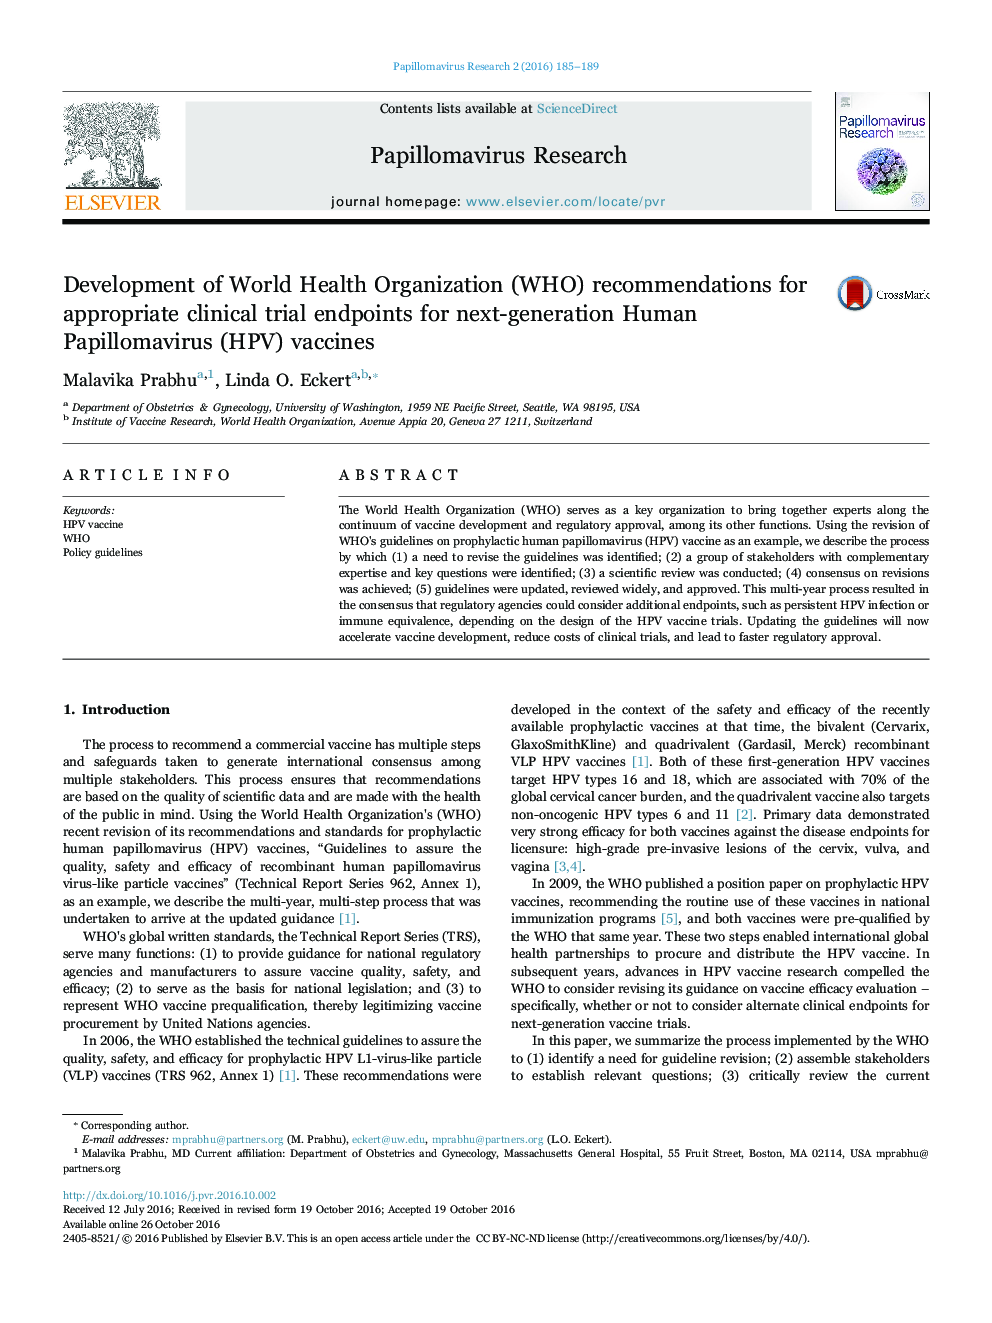 Development of World Health Organization (WHO) recommendations for appropriate clinical trial endpoints for next-generation Human Papillomavirus (HPV) vaccines